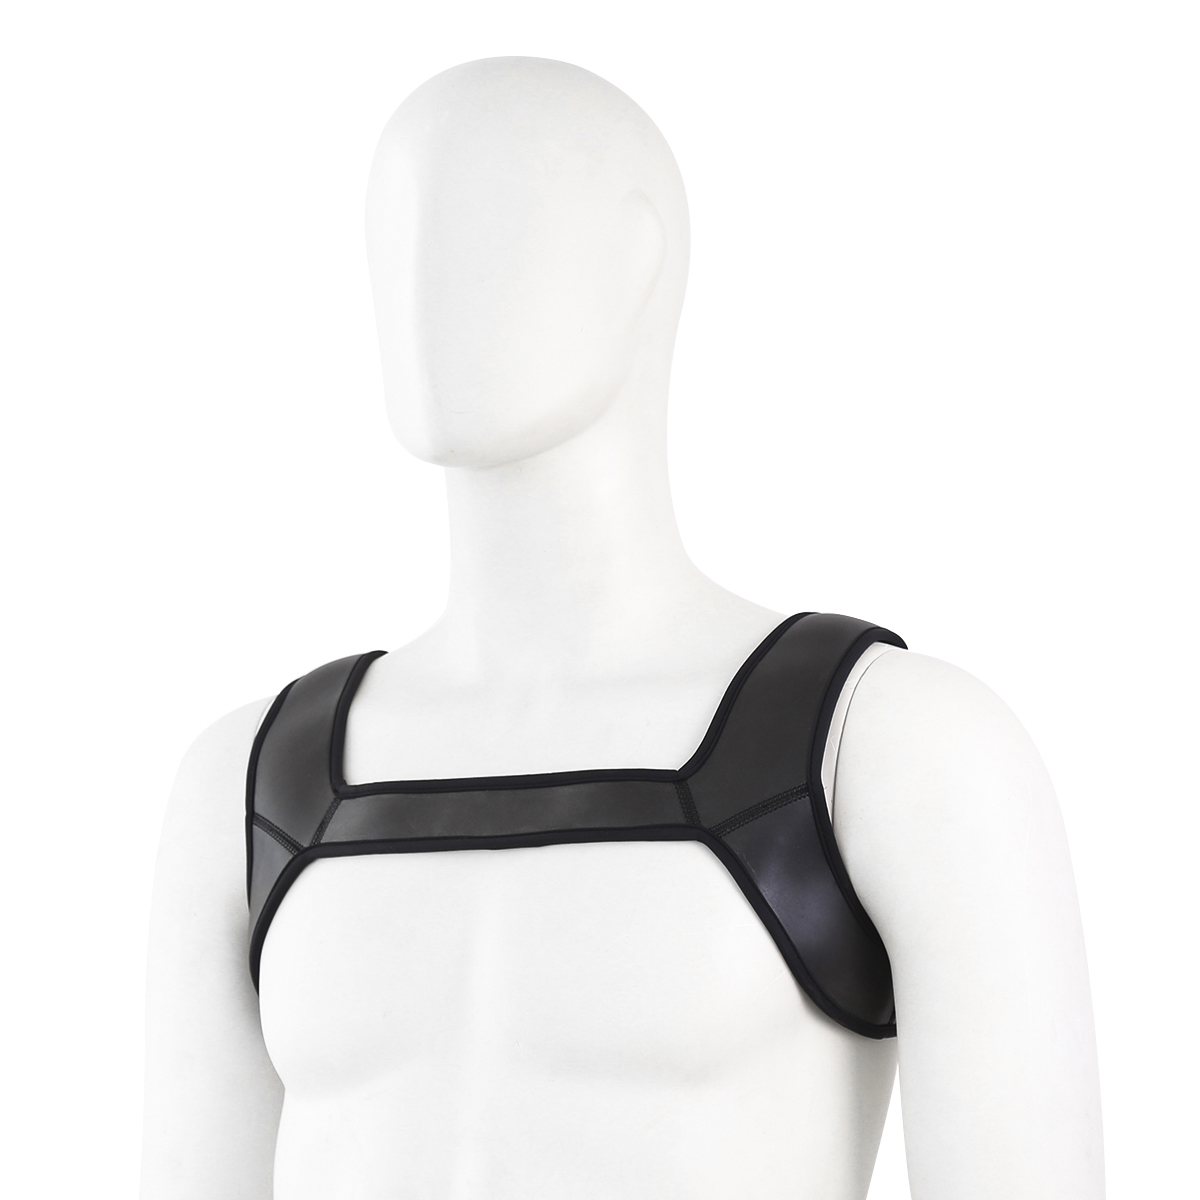 Harness-Sport-Muscle-Protector-M-OPR-321004-1